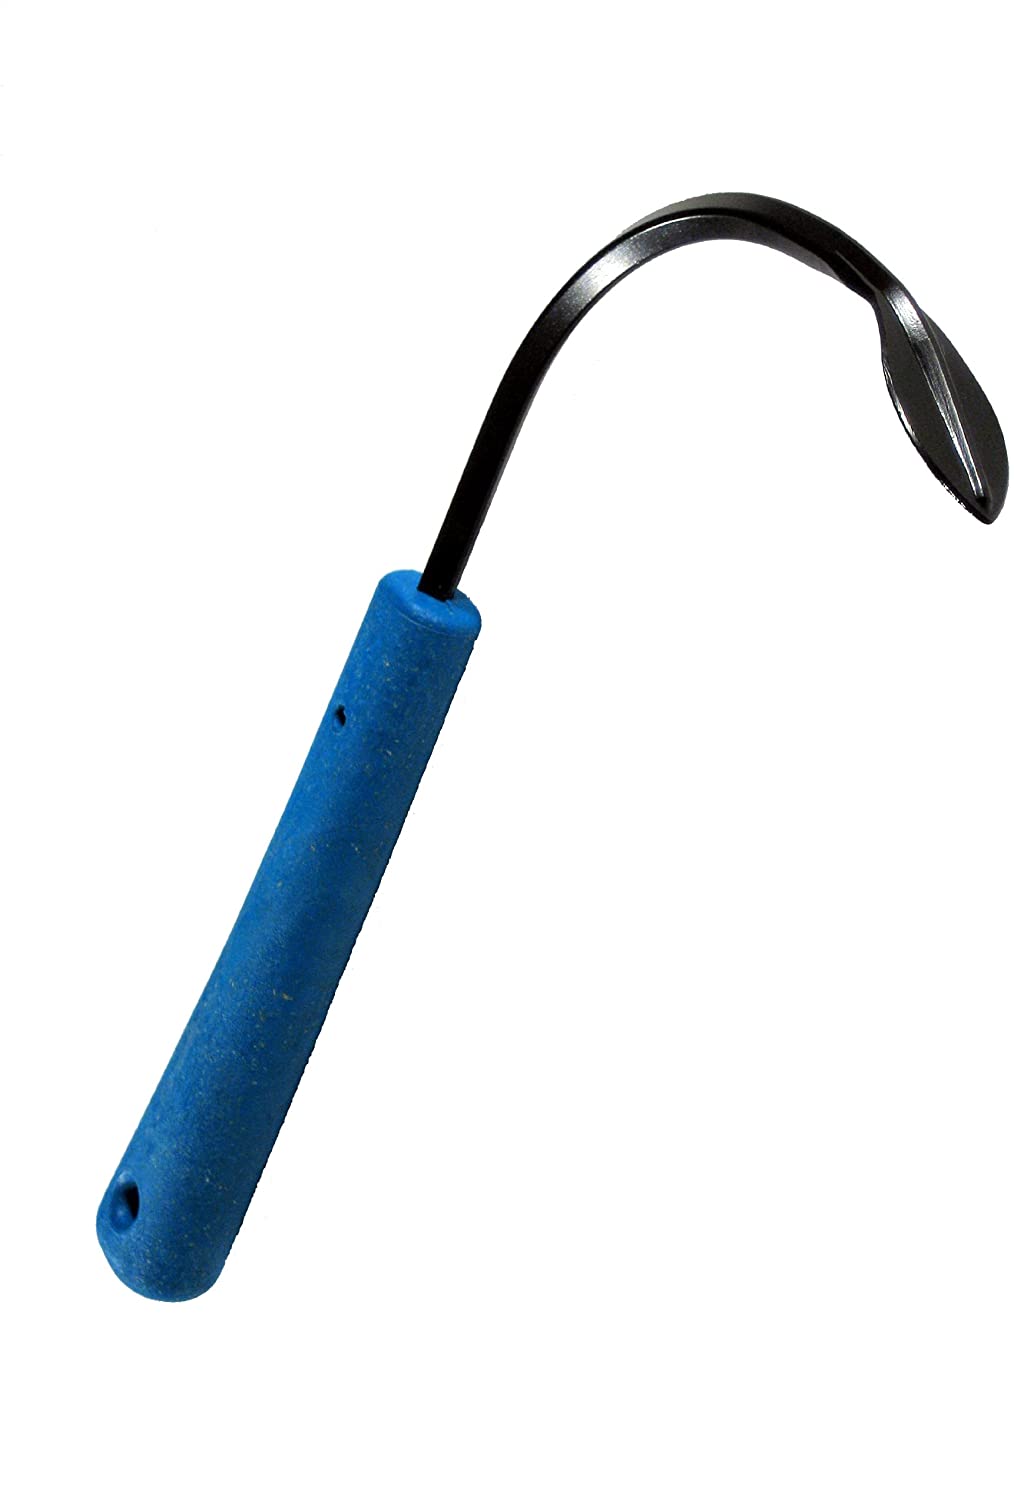 Cobrahead®-original-weeder-cultivator-garden-hand-tool-forged-steel-blade-recycled-plastic-handle-ergonomically-designed-for-digging-edging-planting-gardeners-love-our-most-versatile-tool